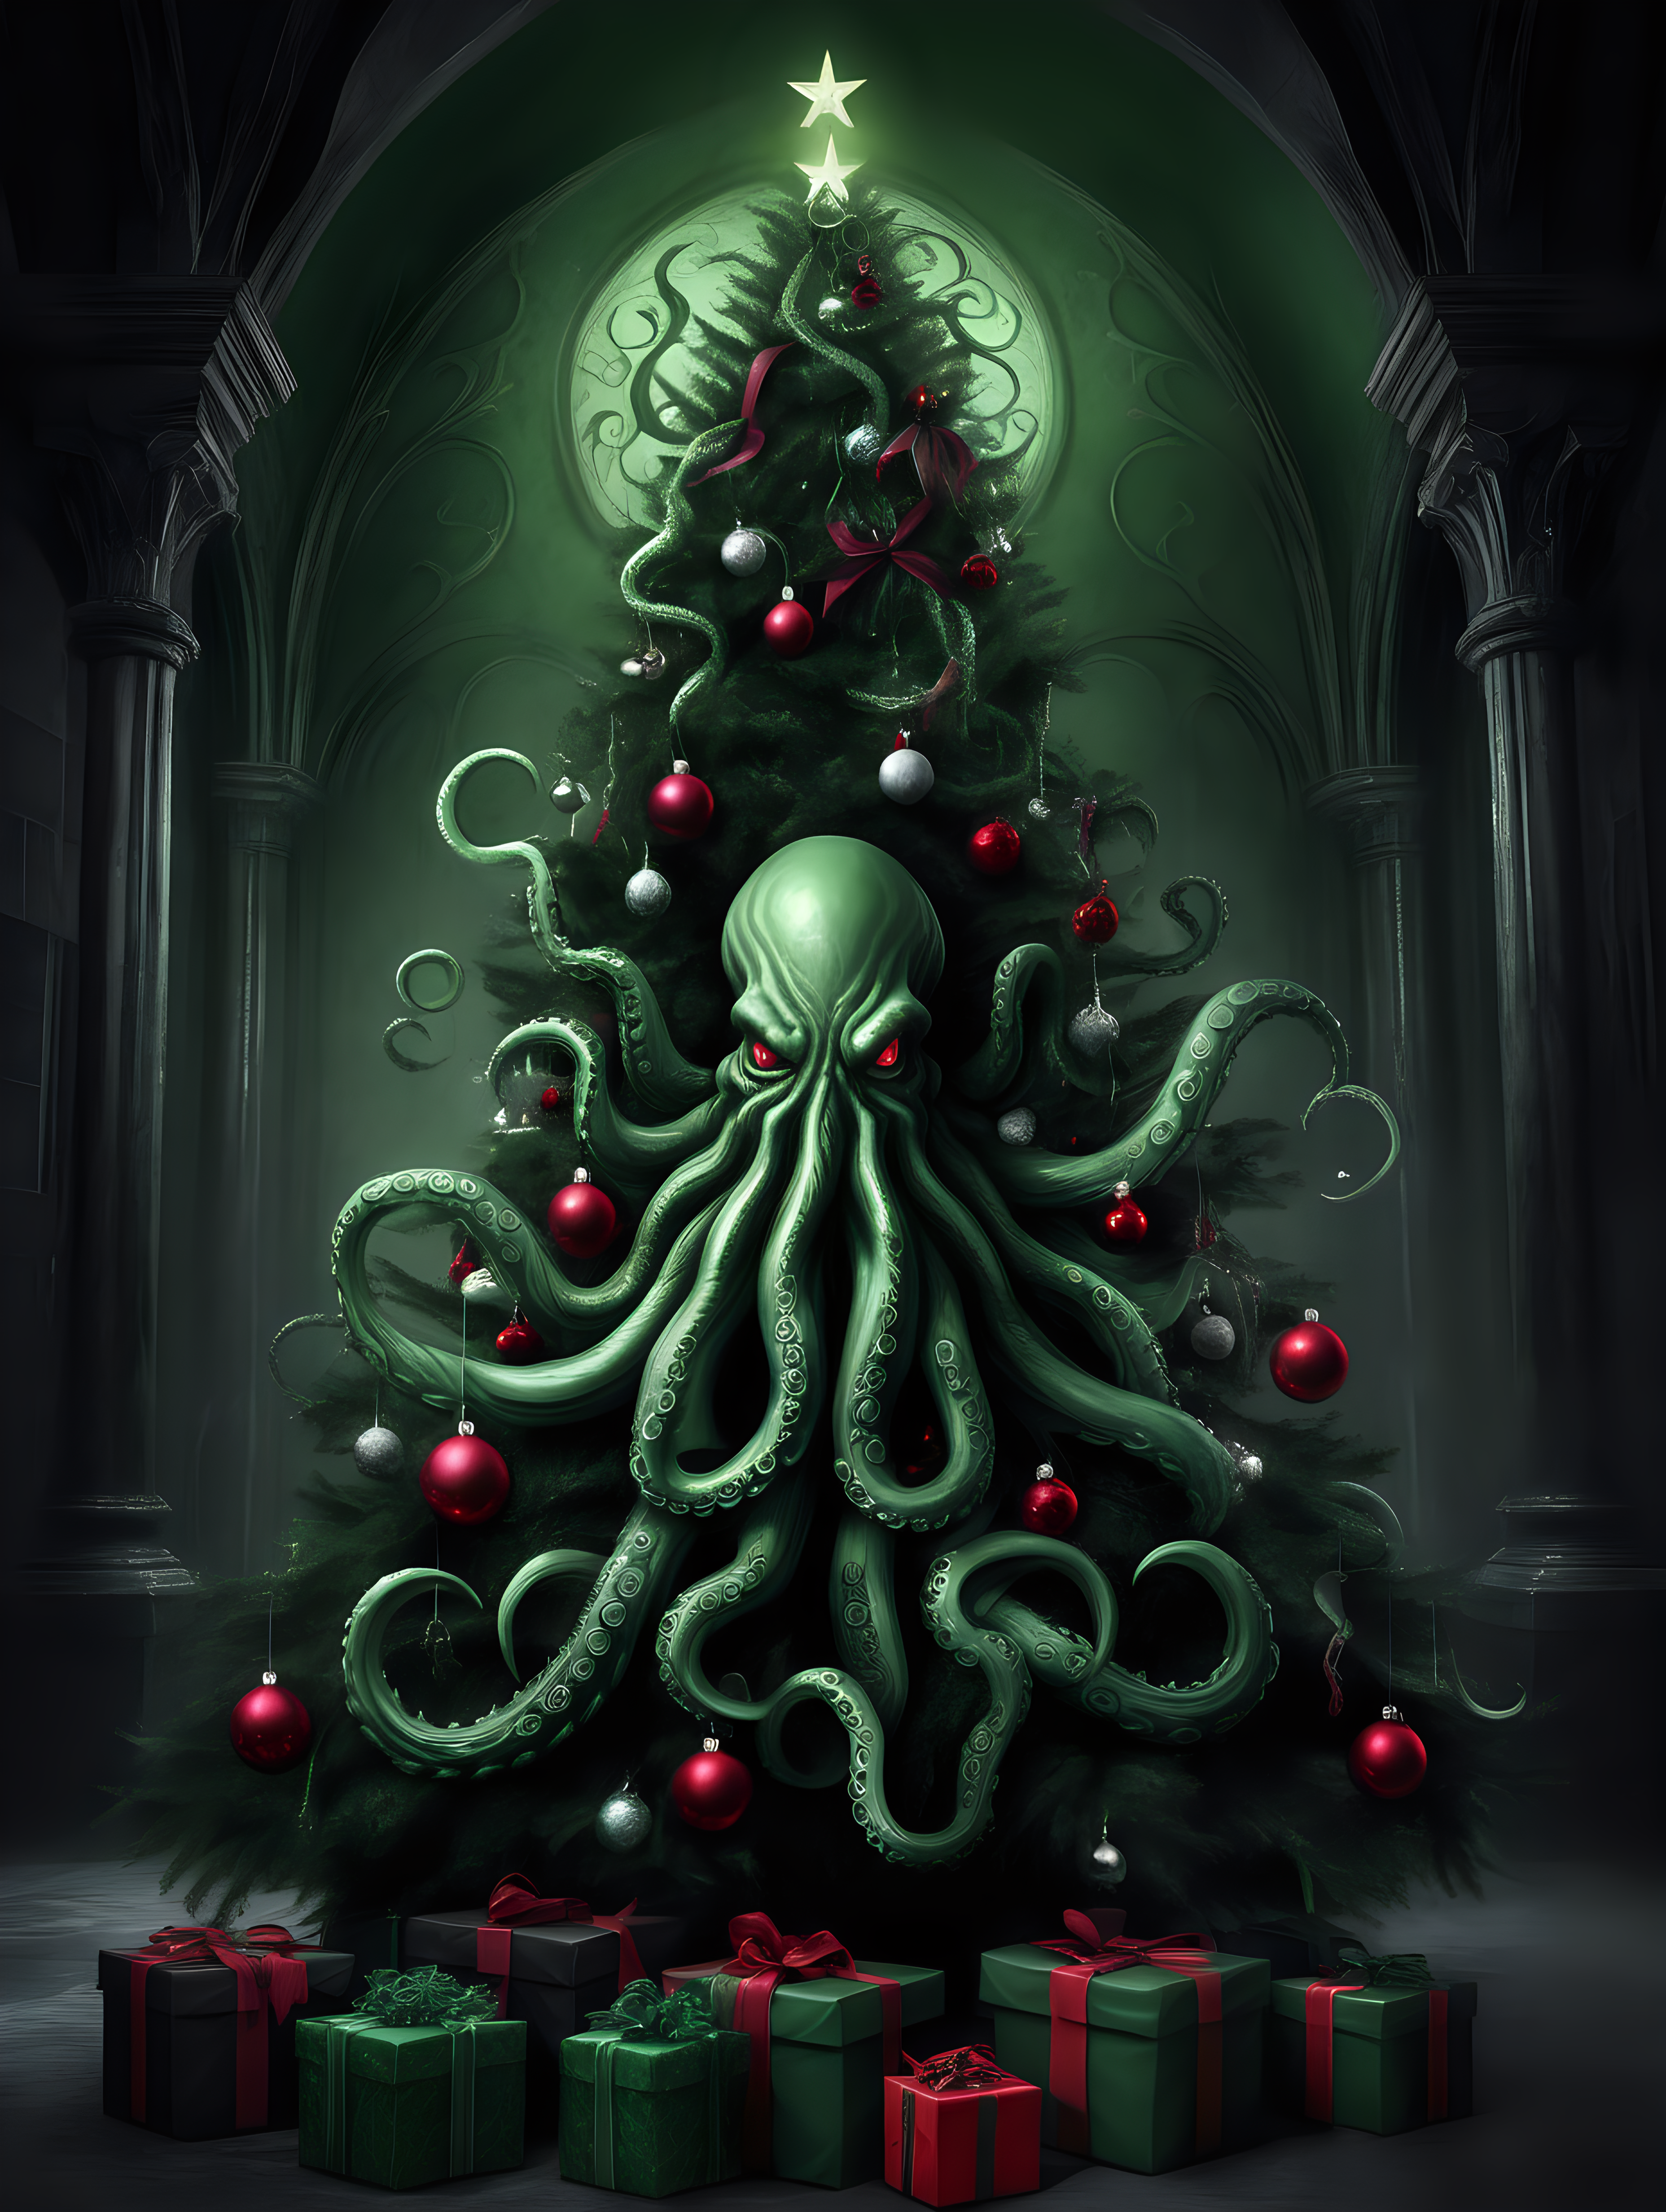 Gothic Christmas tree with Cthulhus tentacles reaching through